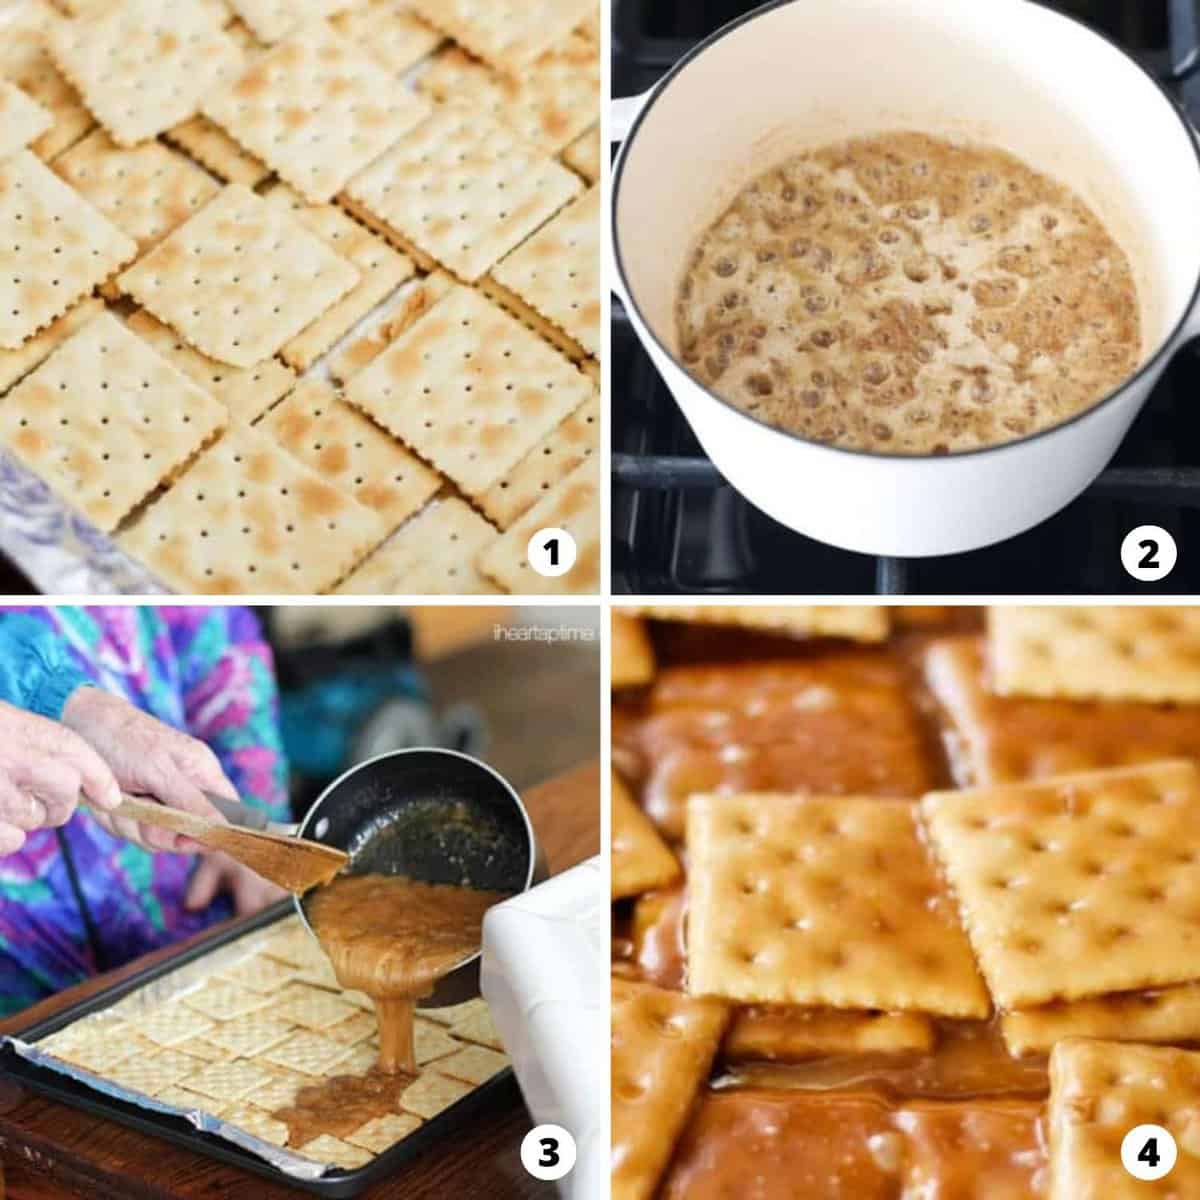 The process of making saltine cracker toffee in a four step photo collage.